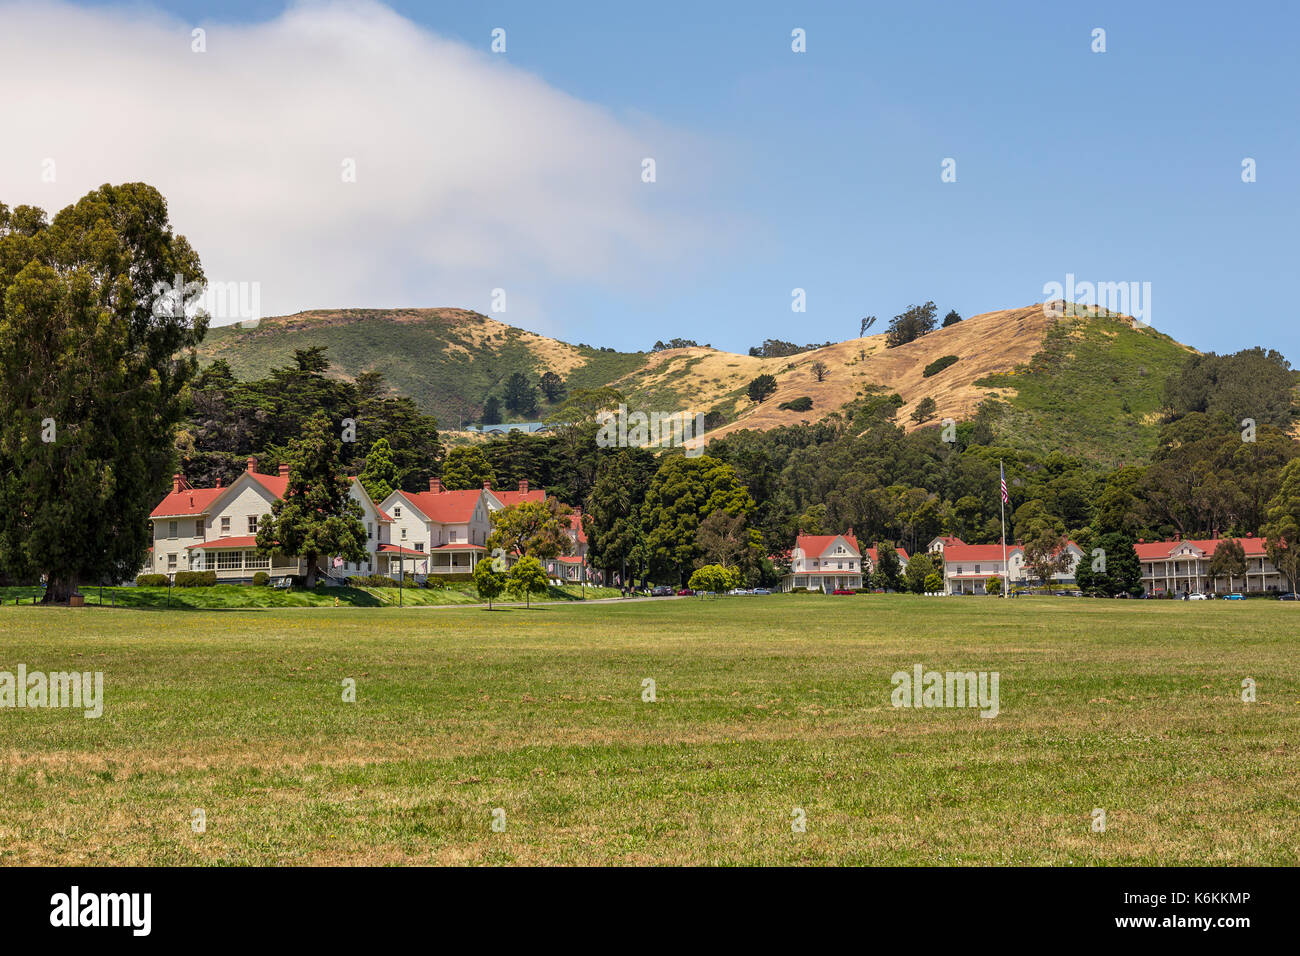 Cavallo Point Lodge, The Lodge at the Golden Gate, hotel, rooms and lodging, Fort Baker, city of Sausalito, Sausalito, Marin County, California Stock Photo